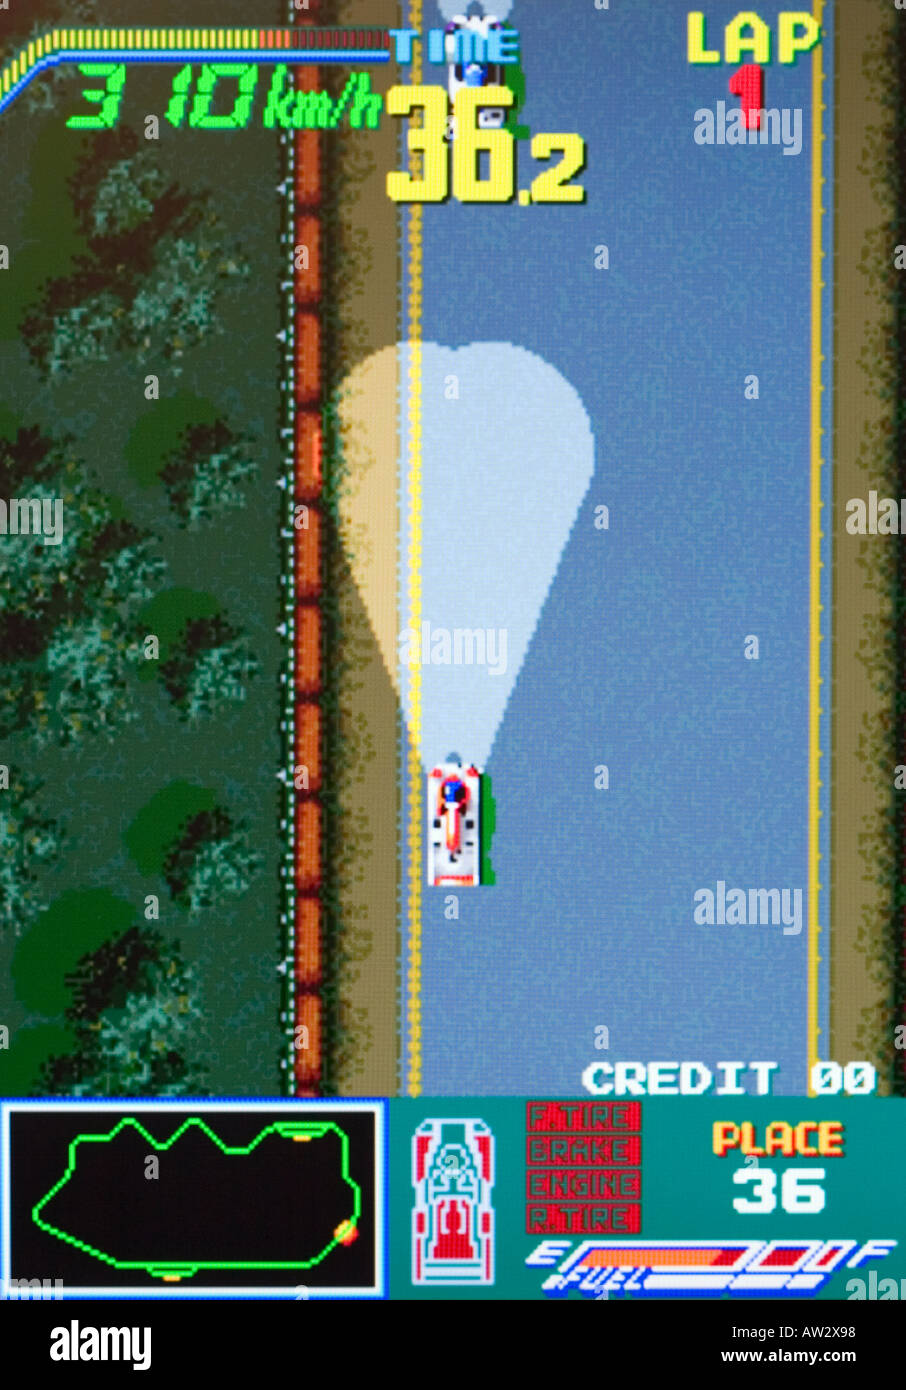 Chequered Flag Konami 1988 Vintage arcade videogame screen shot - EDITORIAL USE ONLY Stock Photo